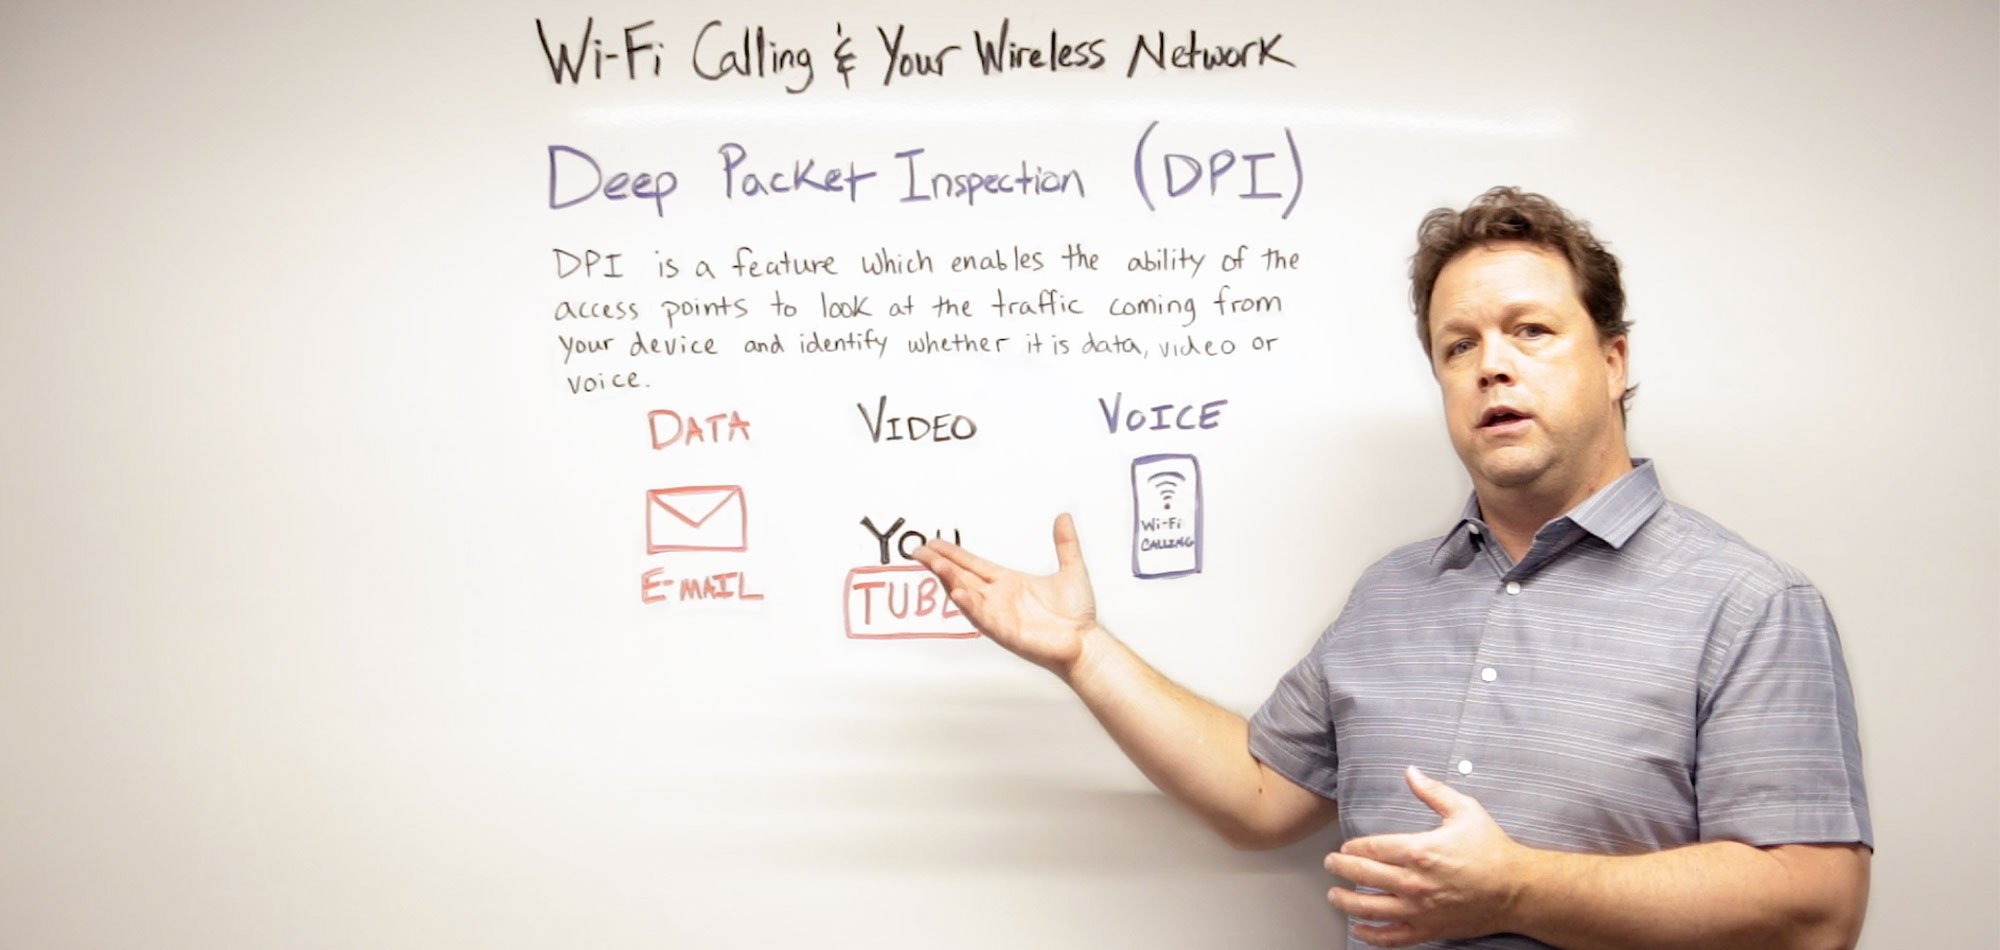 Whiteboard Wednesday: Wi-Fi Calling & Your Wireless Network [Part 2]